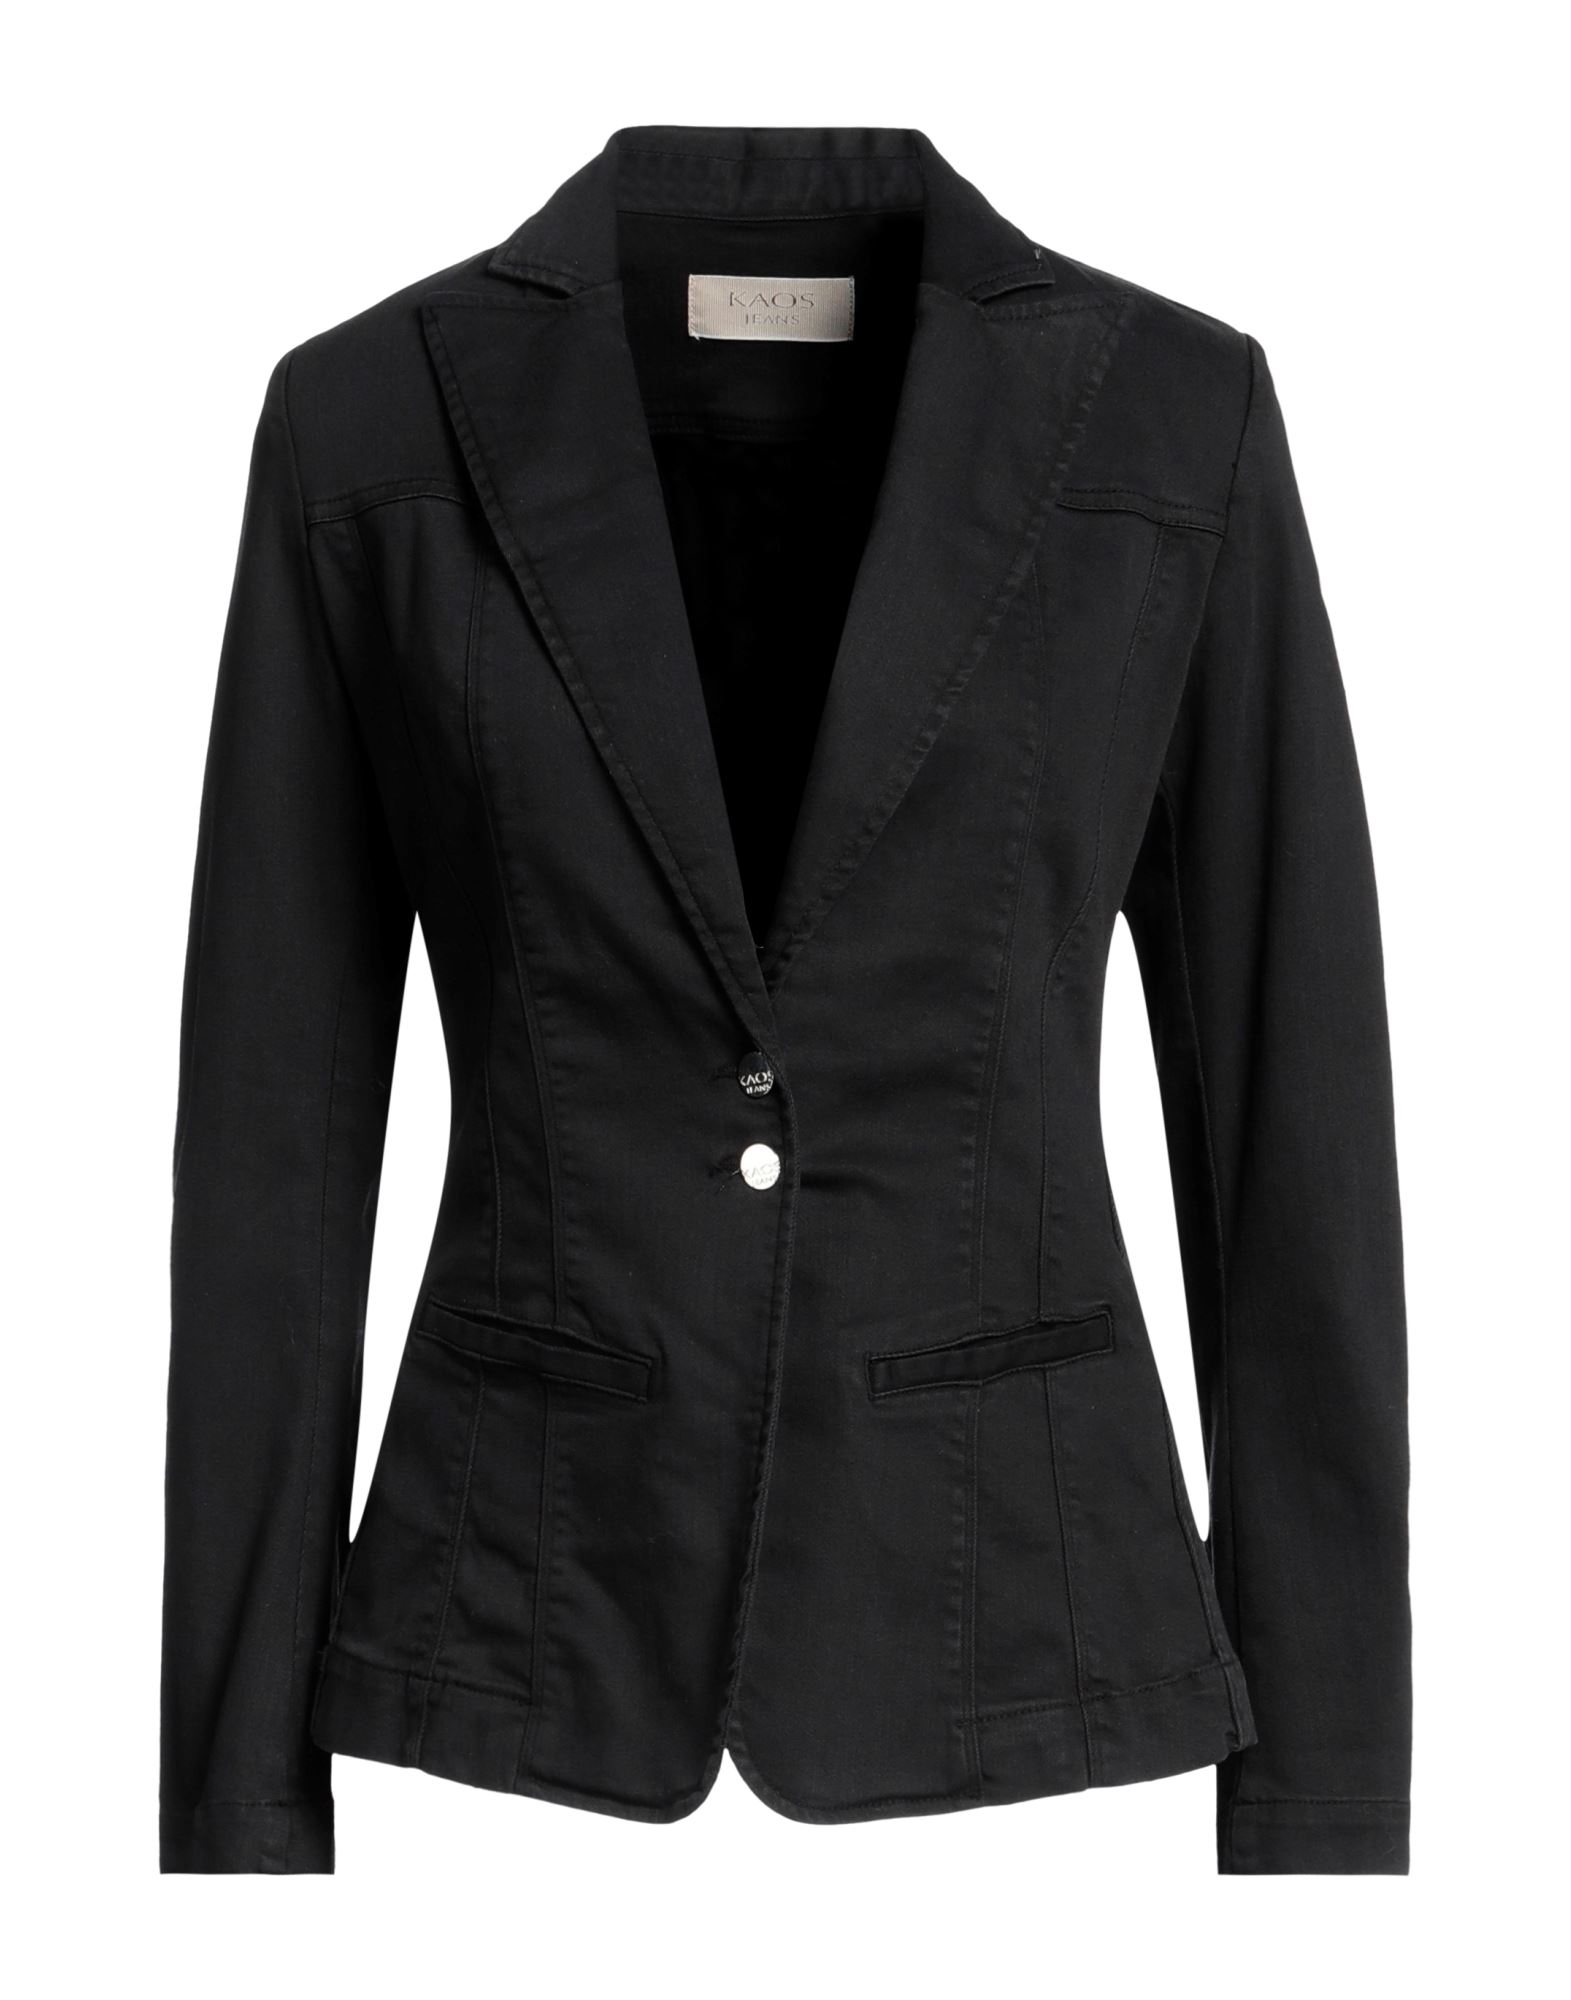 Kaos Jeans Suit Jackets In Black